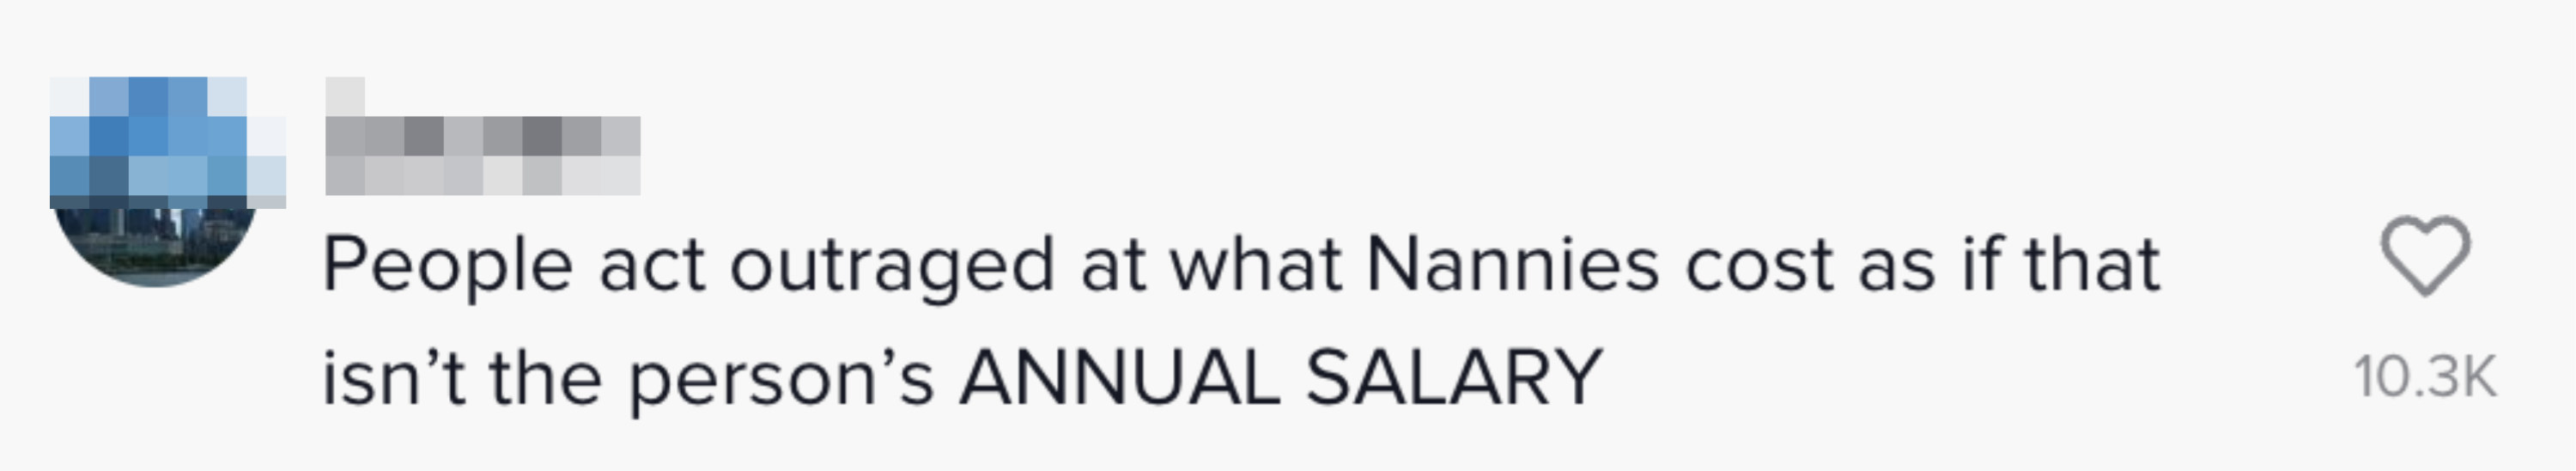 Post: People act outraged at what Nannies cost as if that isn&#x27;t the person&#x27;s ANNUAL SALARY